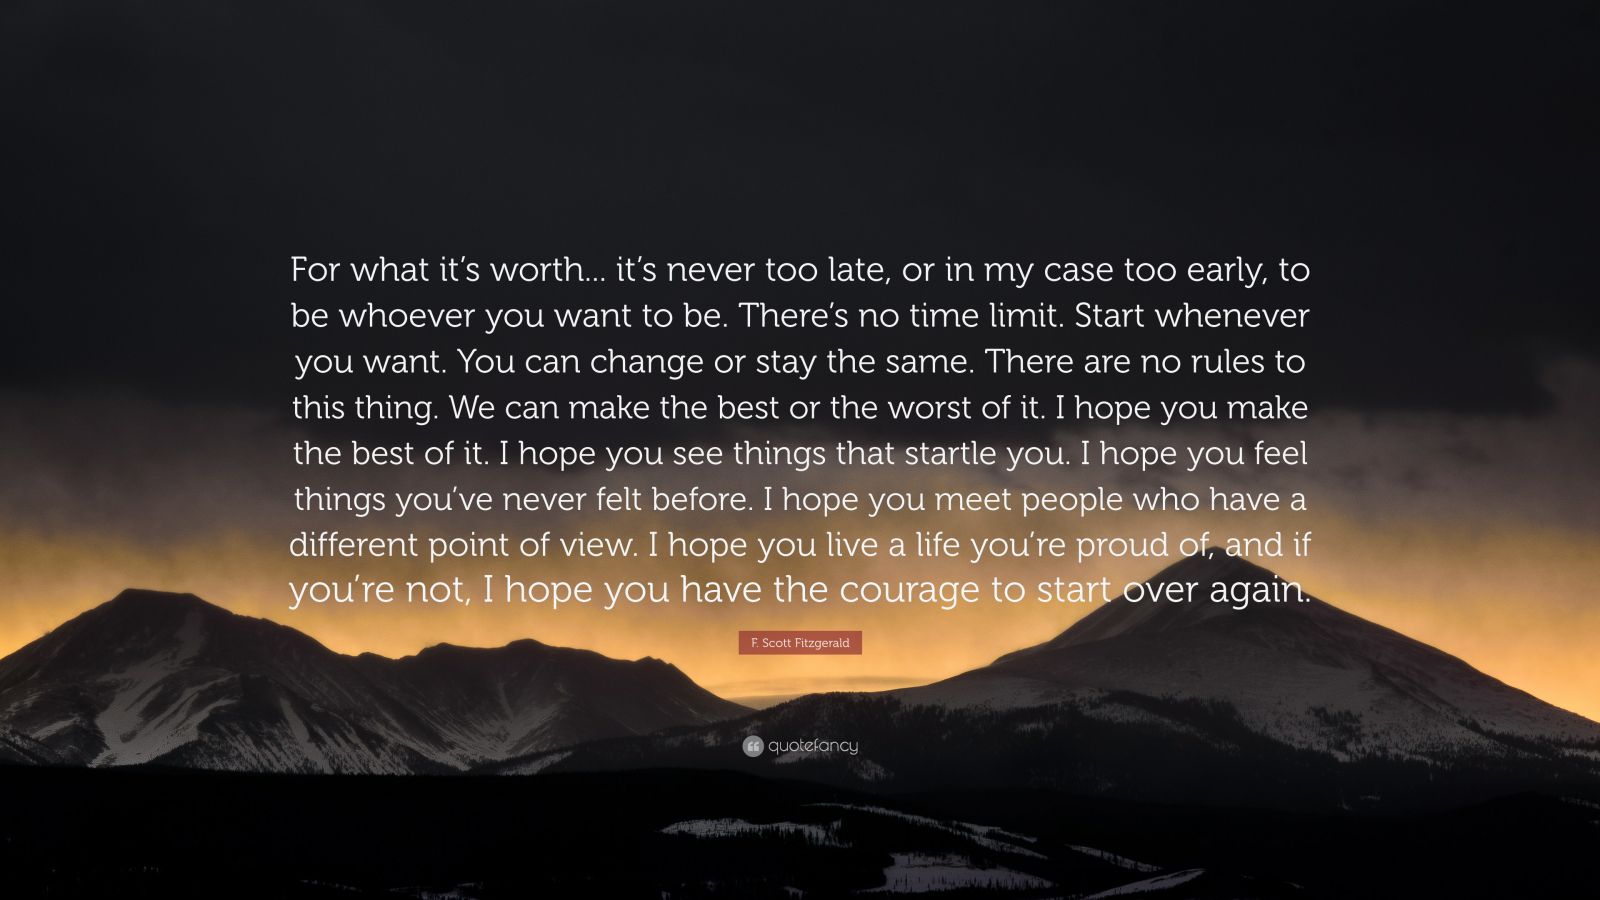 6365905 F Scott Fitzgerald Quote For what it s worth it s never too late